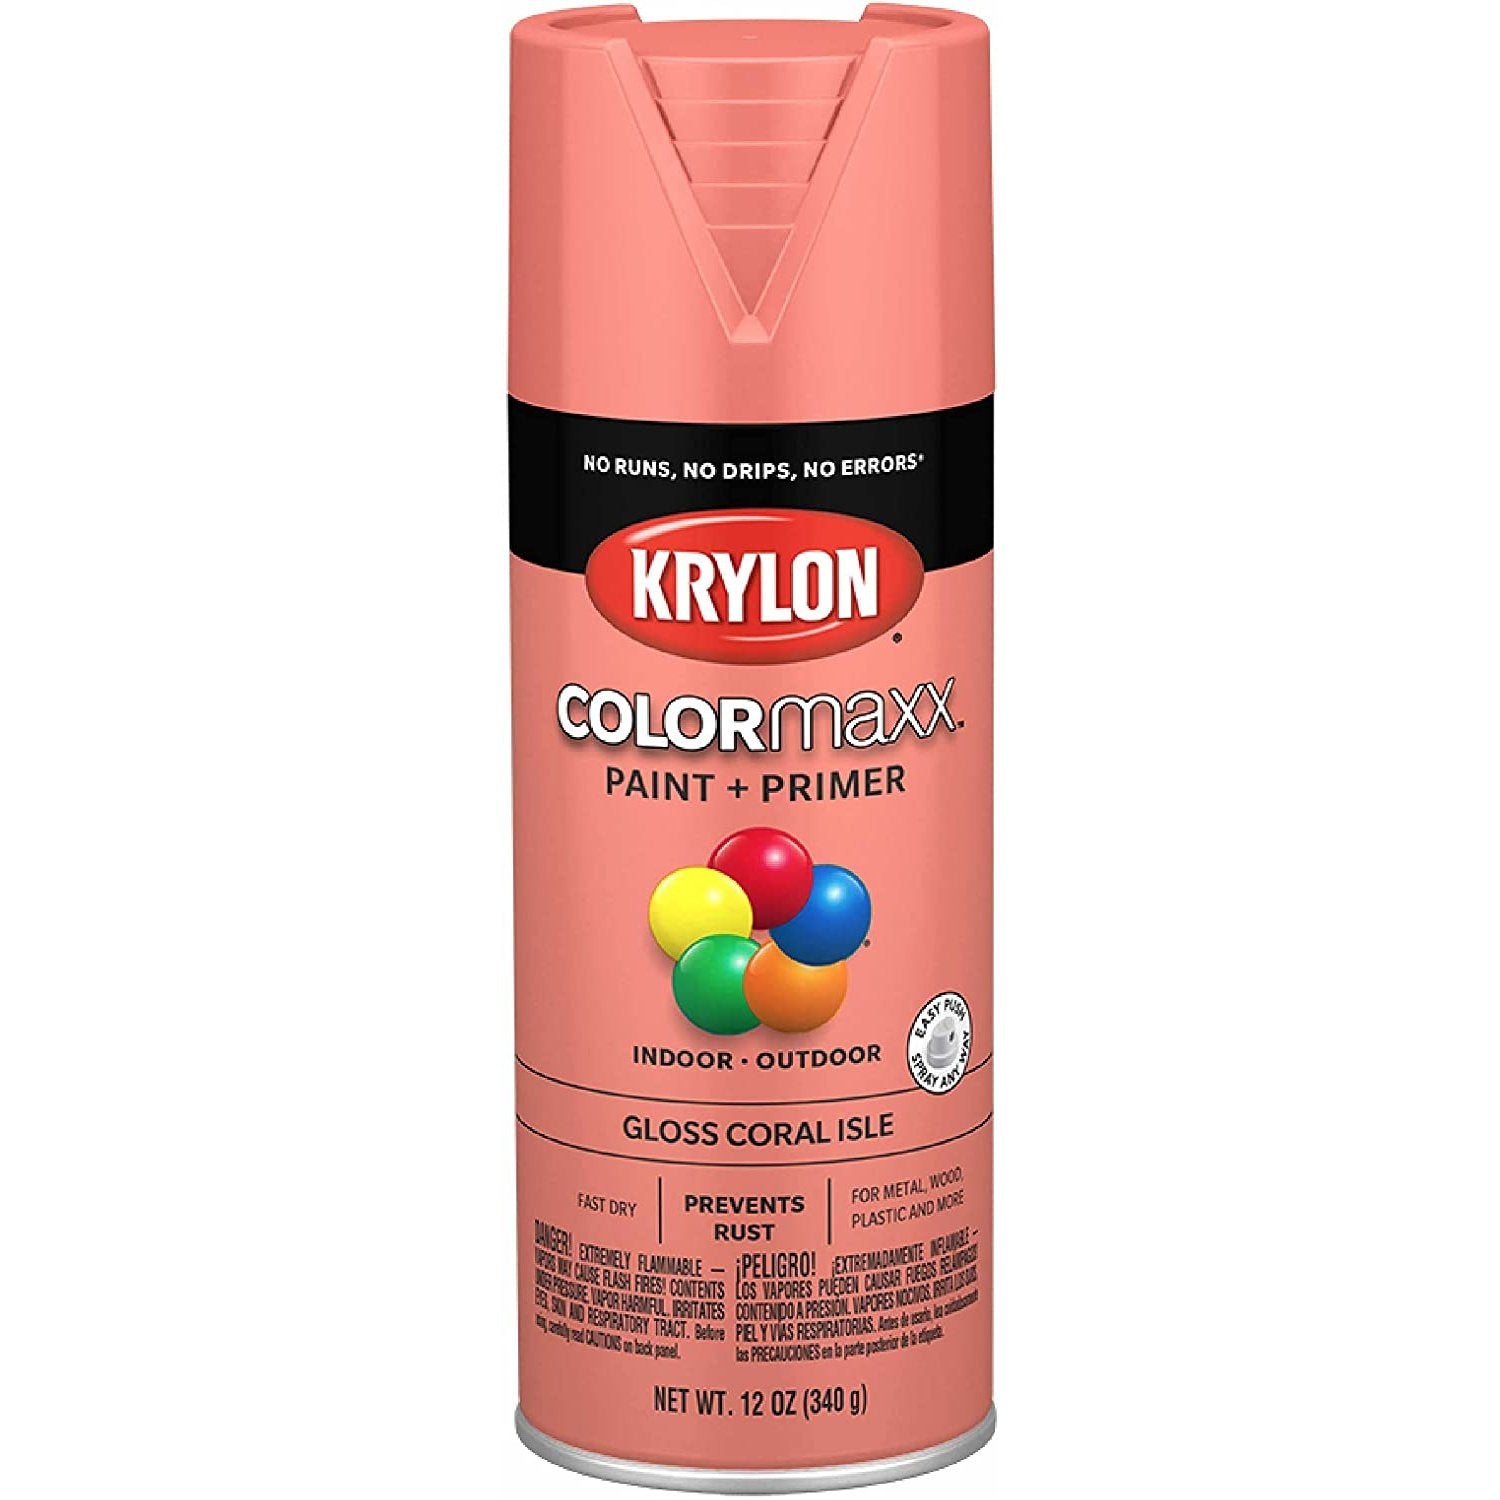 Krylon K05525007 COLORmaxx Spray Paint and Primer for Indoor/Outdoor Use, Gloss Ivy Leaf Green